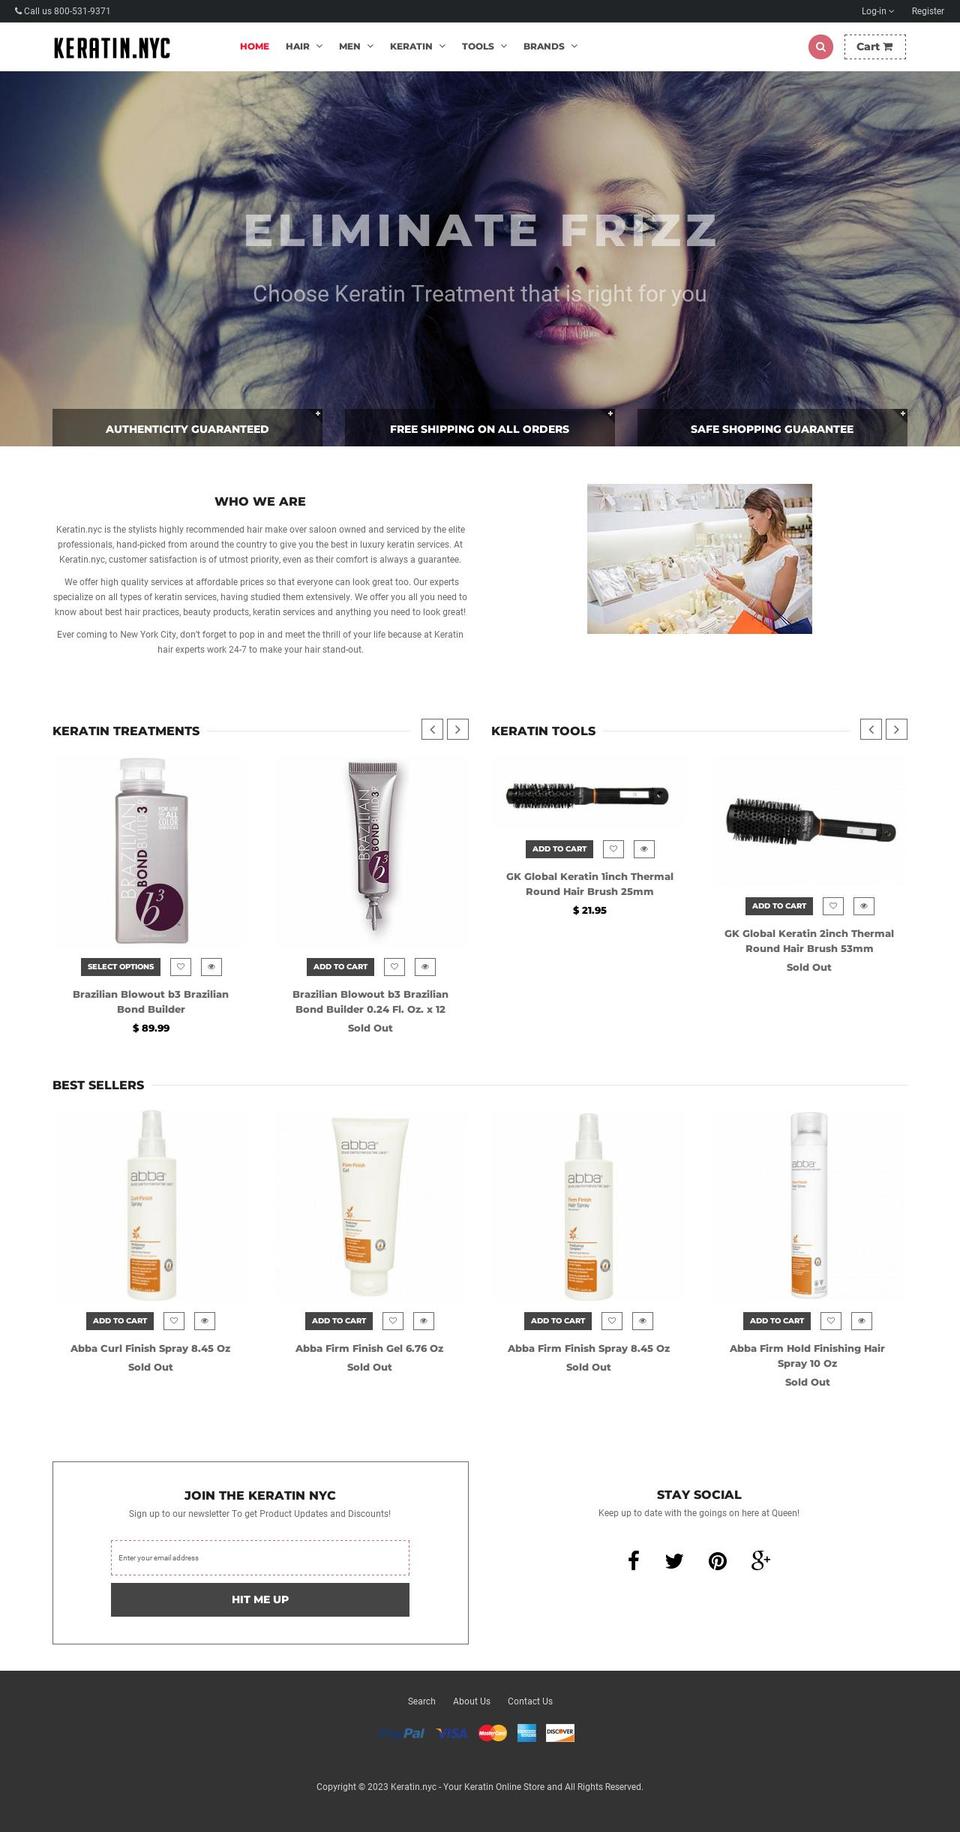 QUEEN Shopify theme site example keratin.nyc